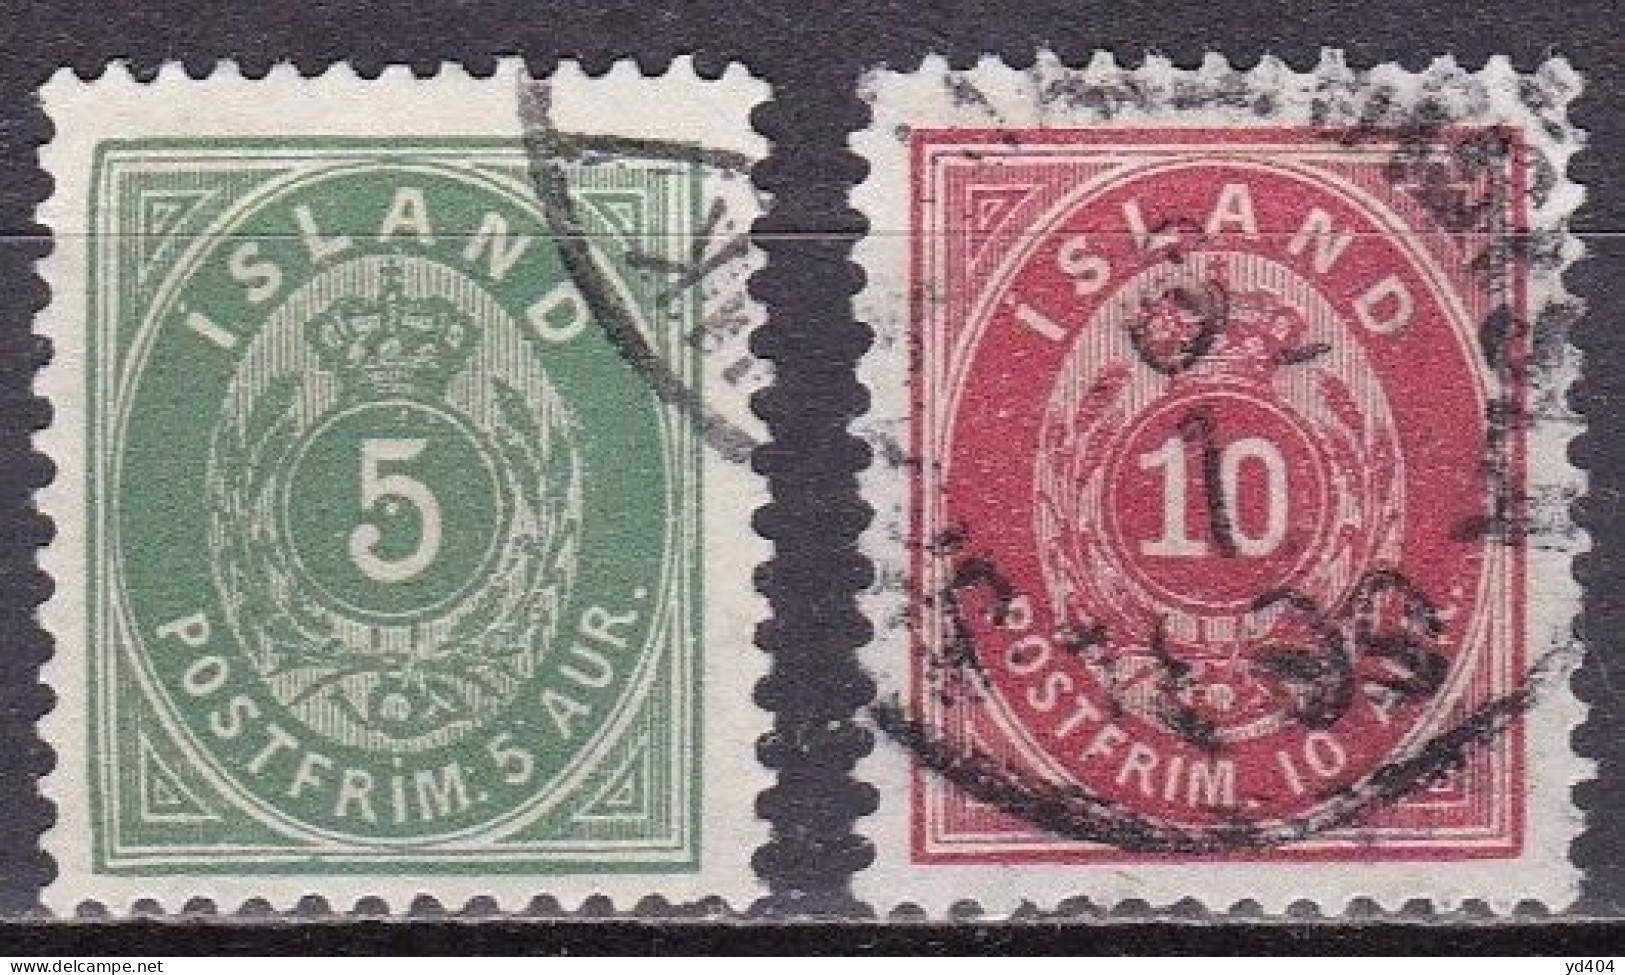 IS003E – ISLANDE – ICELAND – 1897 – NUMERAL VALUE IN AUR - PERF. 12,5 – SG # 28-30 USED 6,50 € - Gebraucht